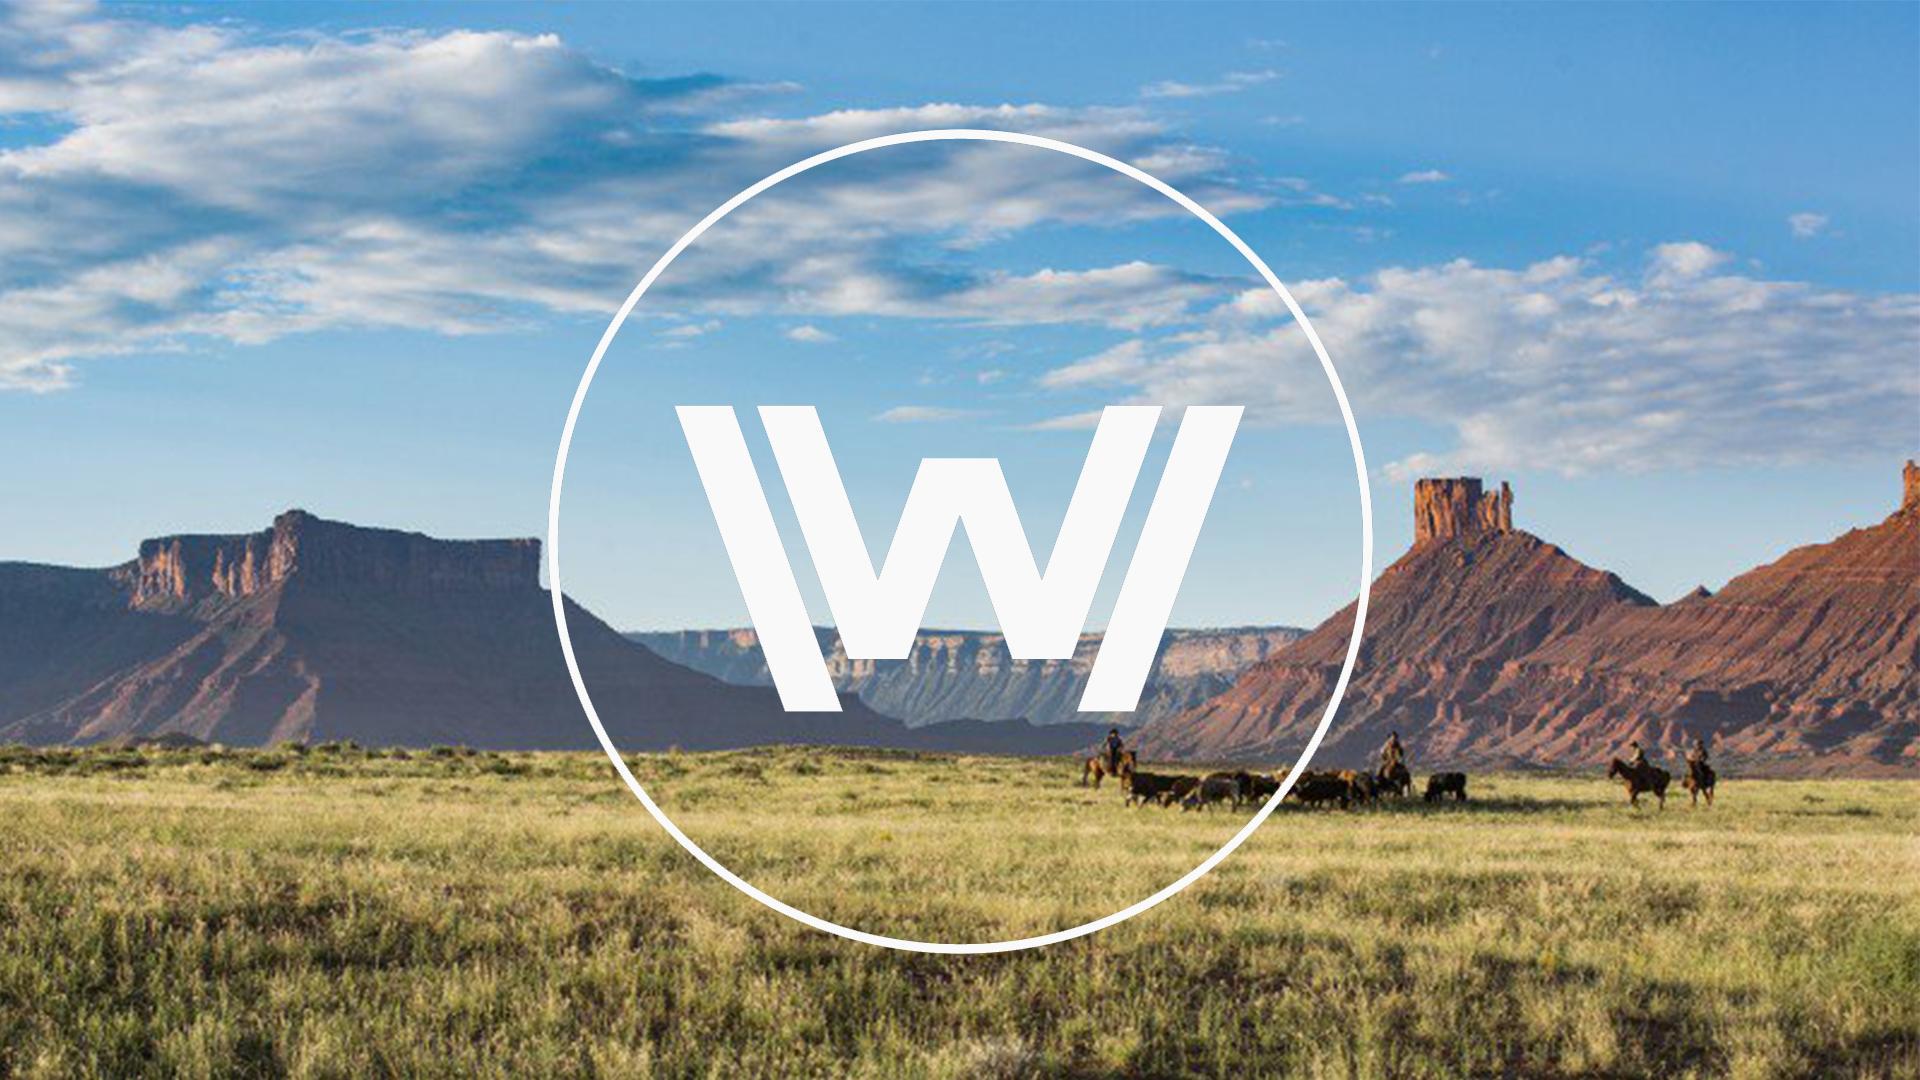 I thought I would share some Westworld wallpaper I made!